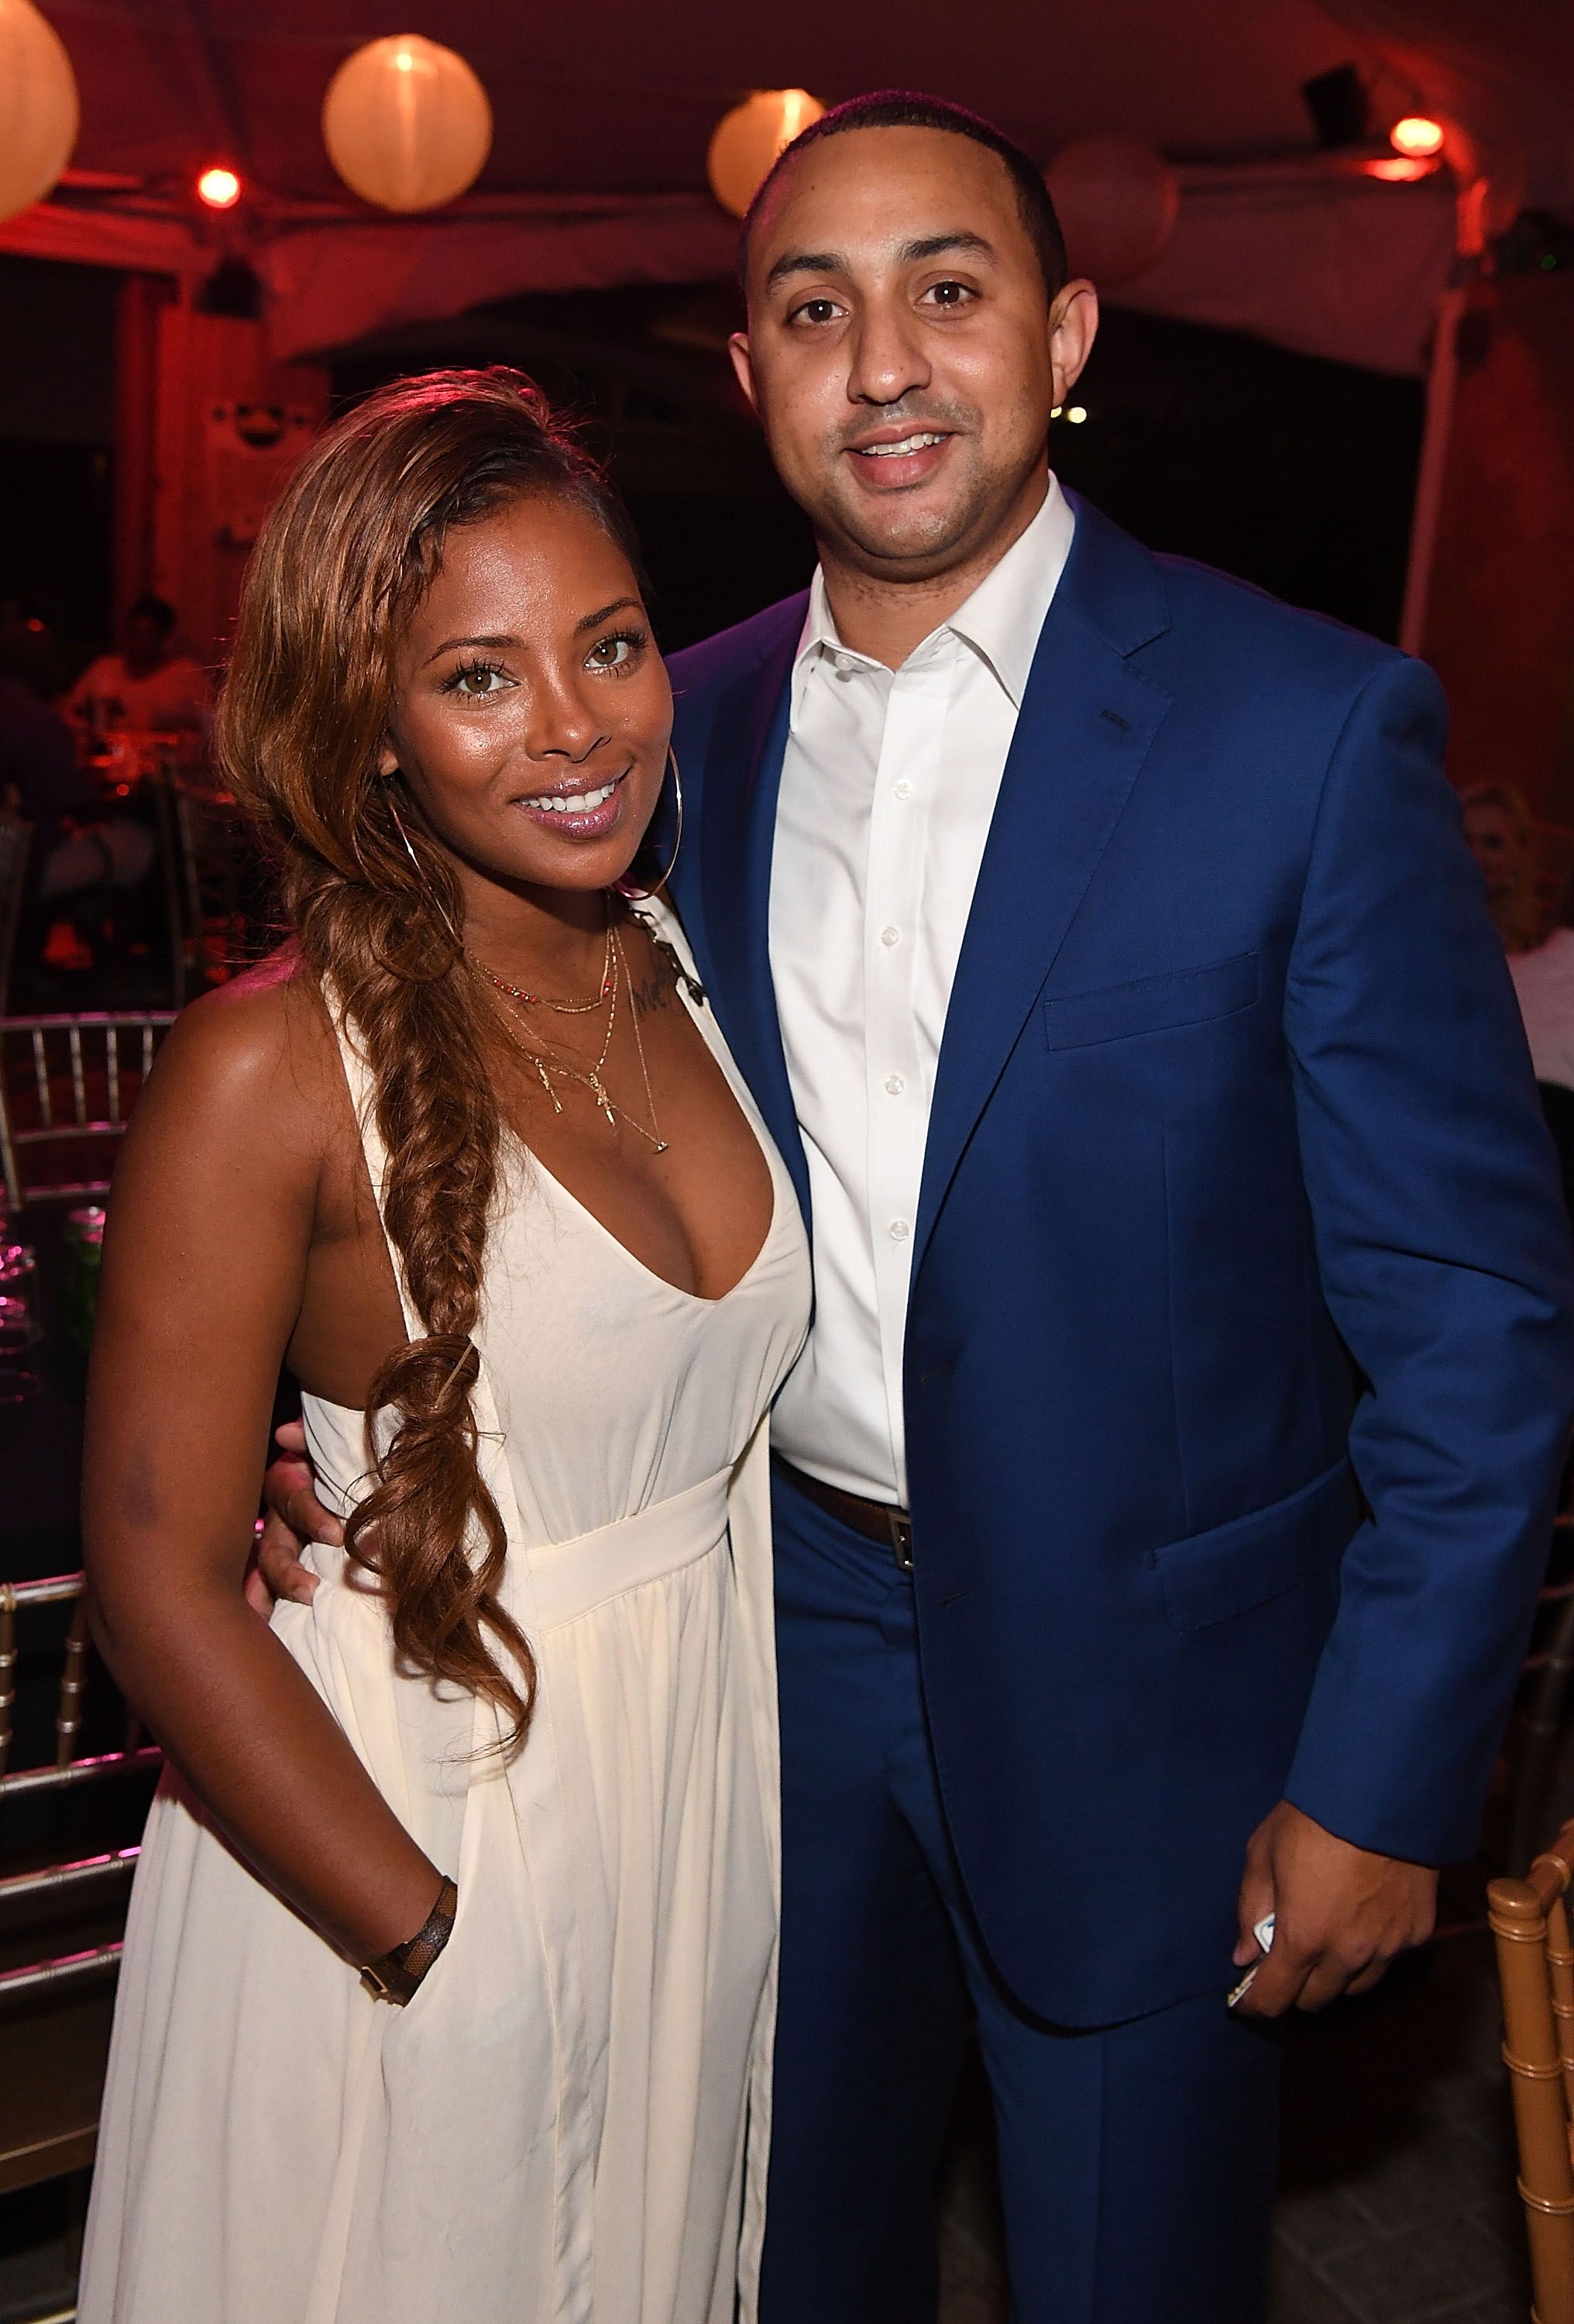 Eva Marcille and Michael Sterling attend ATL Live On The Park: Hip-Hop Soul Edition in Atlanta Georgia in 2016 | Source: Getty Images